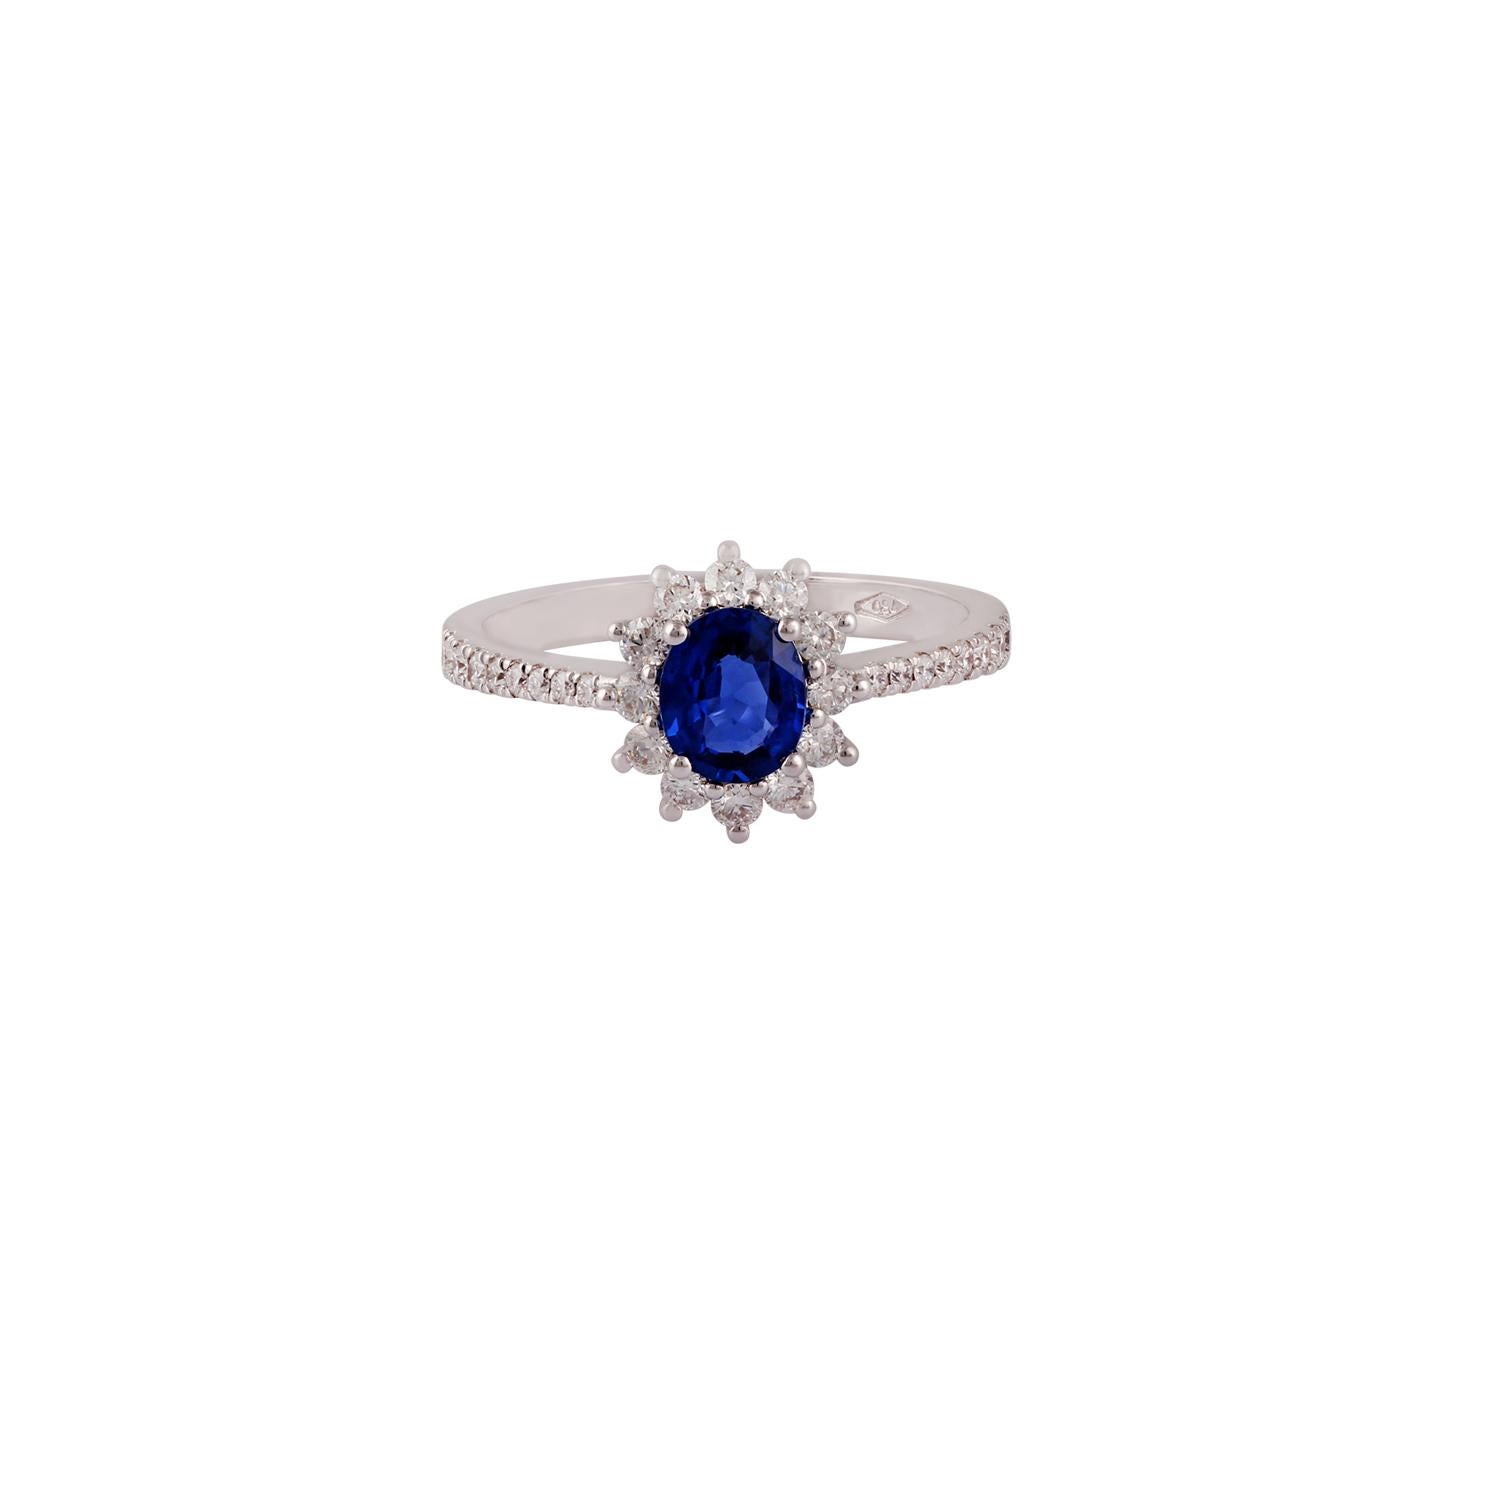 This is an elegant & classic blue sapphire - diamond cluster ring features 1 piece of oval shaped blue sapphire weight 0.68 carat with diamonds in the cluster weight 0.44 carat, this entire ring is made of 18k white gold weight 2.98 grams, ring size